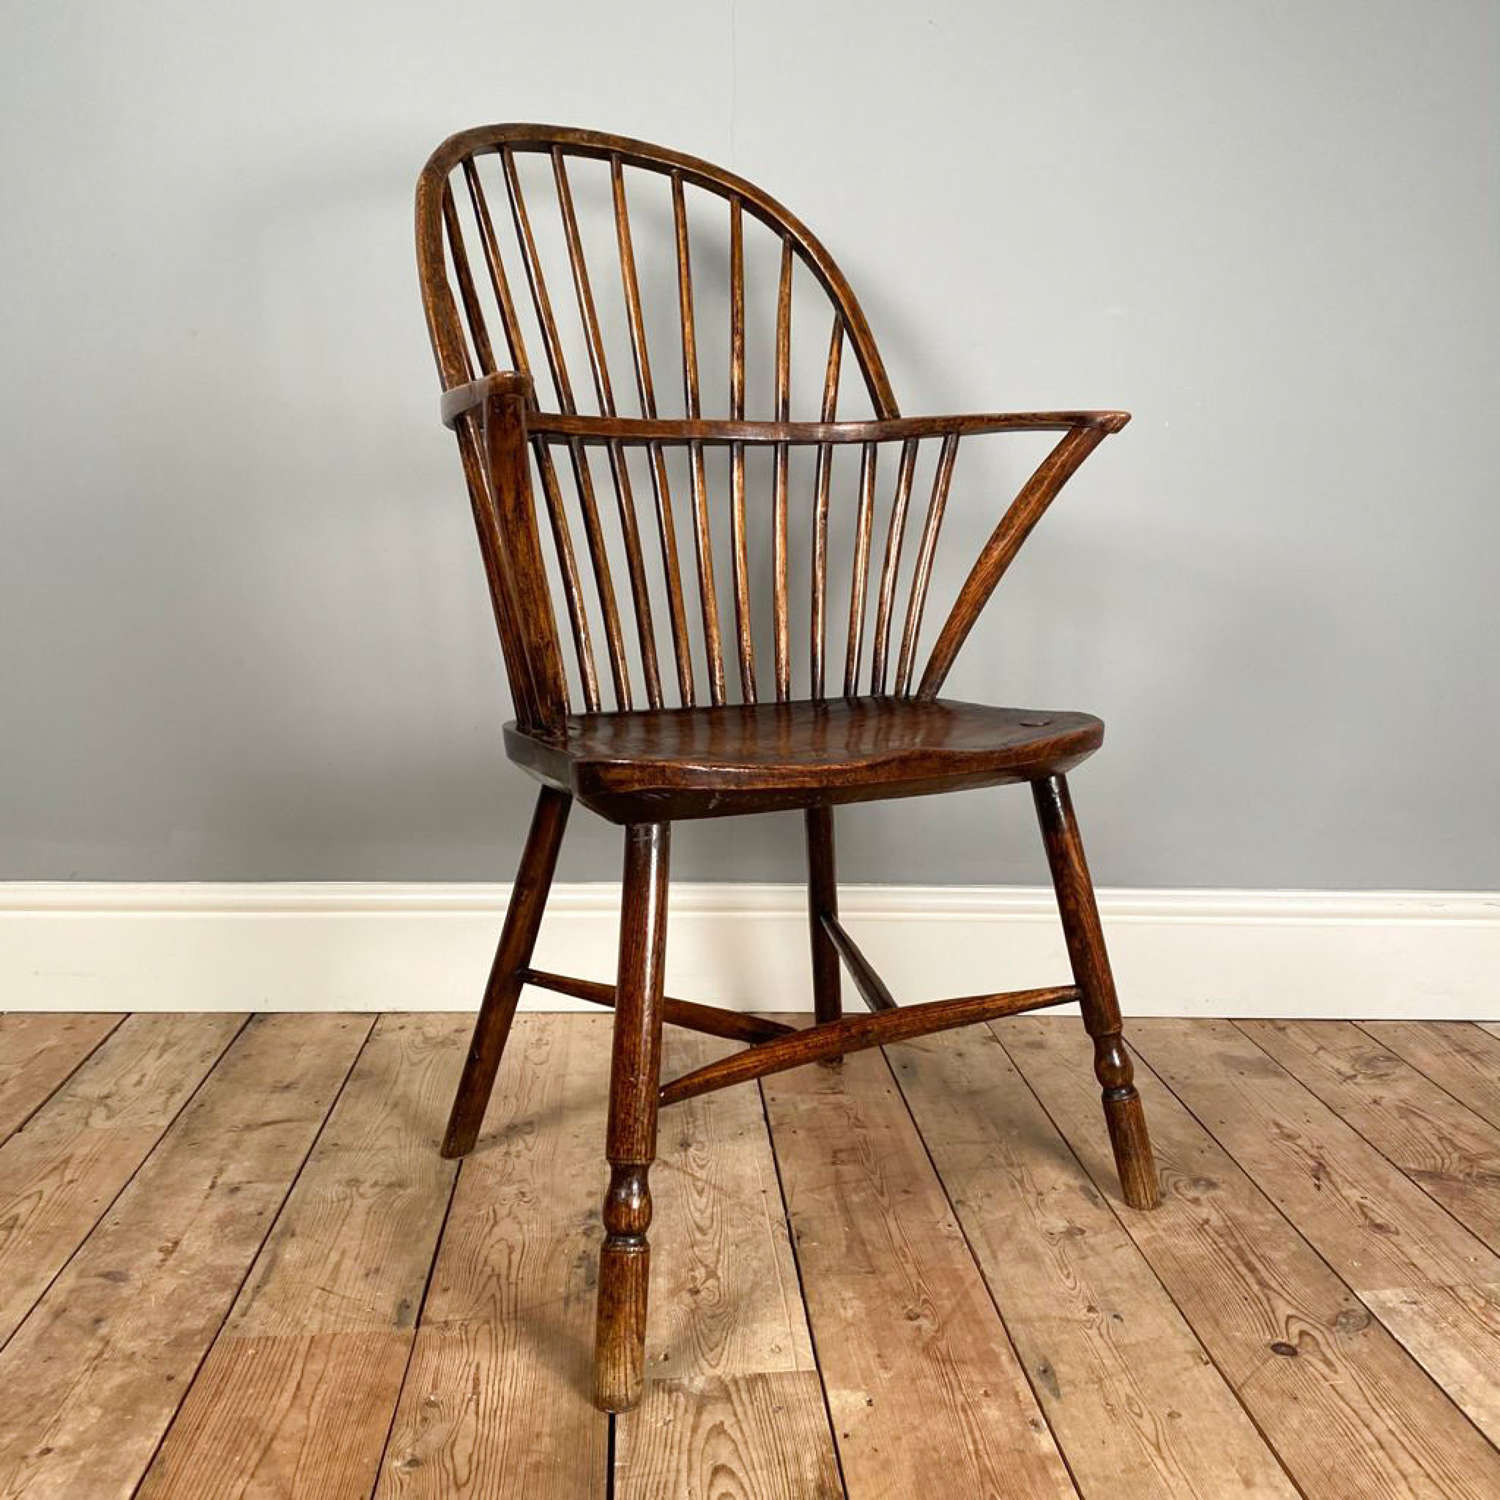 Gillows Ash and Elm Windsor Chair